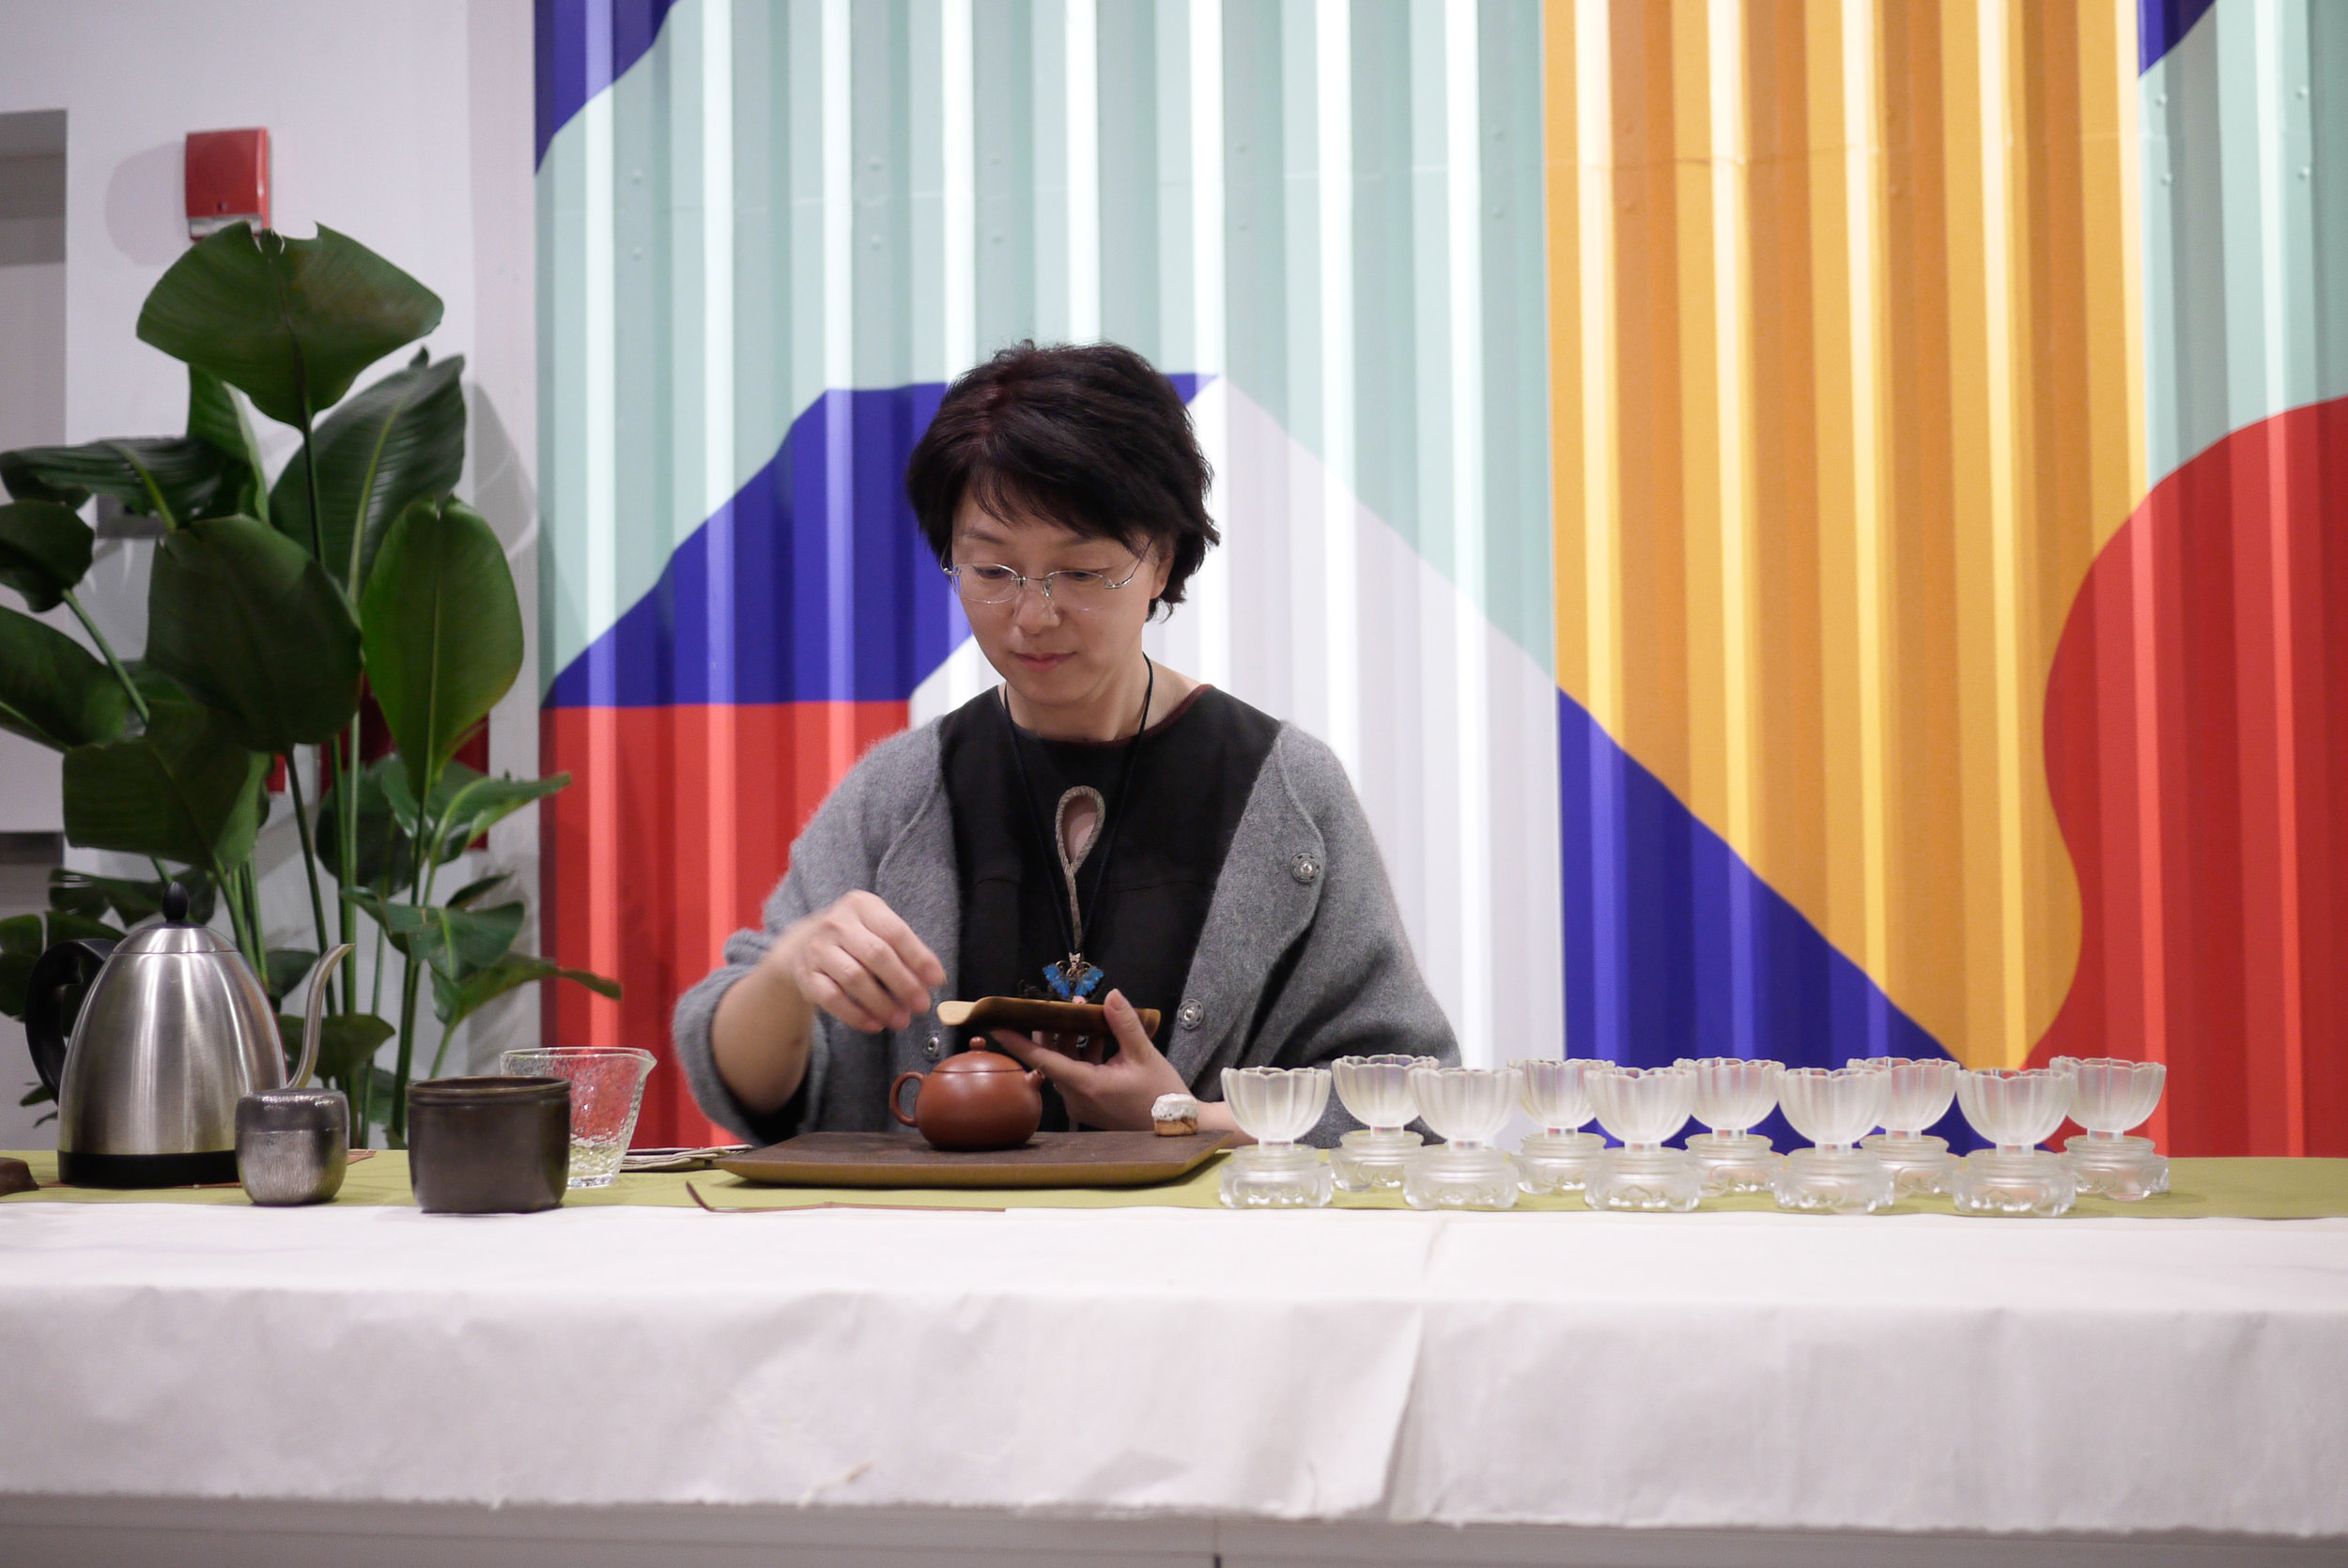  Tea Ceremony at Wix, photographed by Michele Fan 